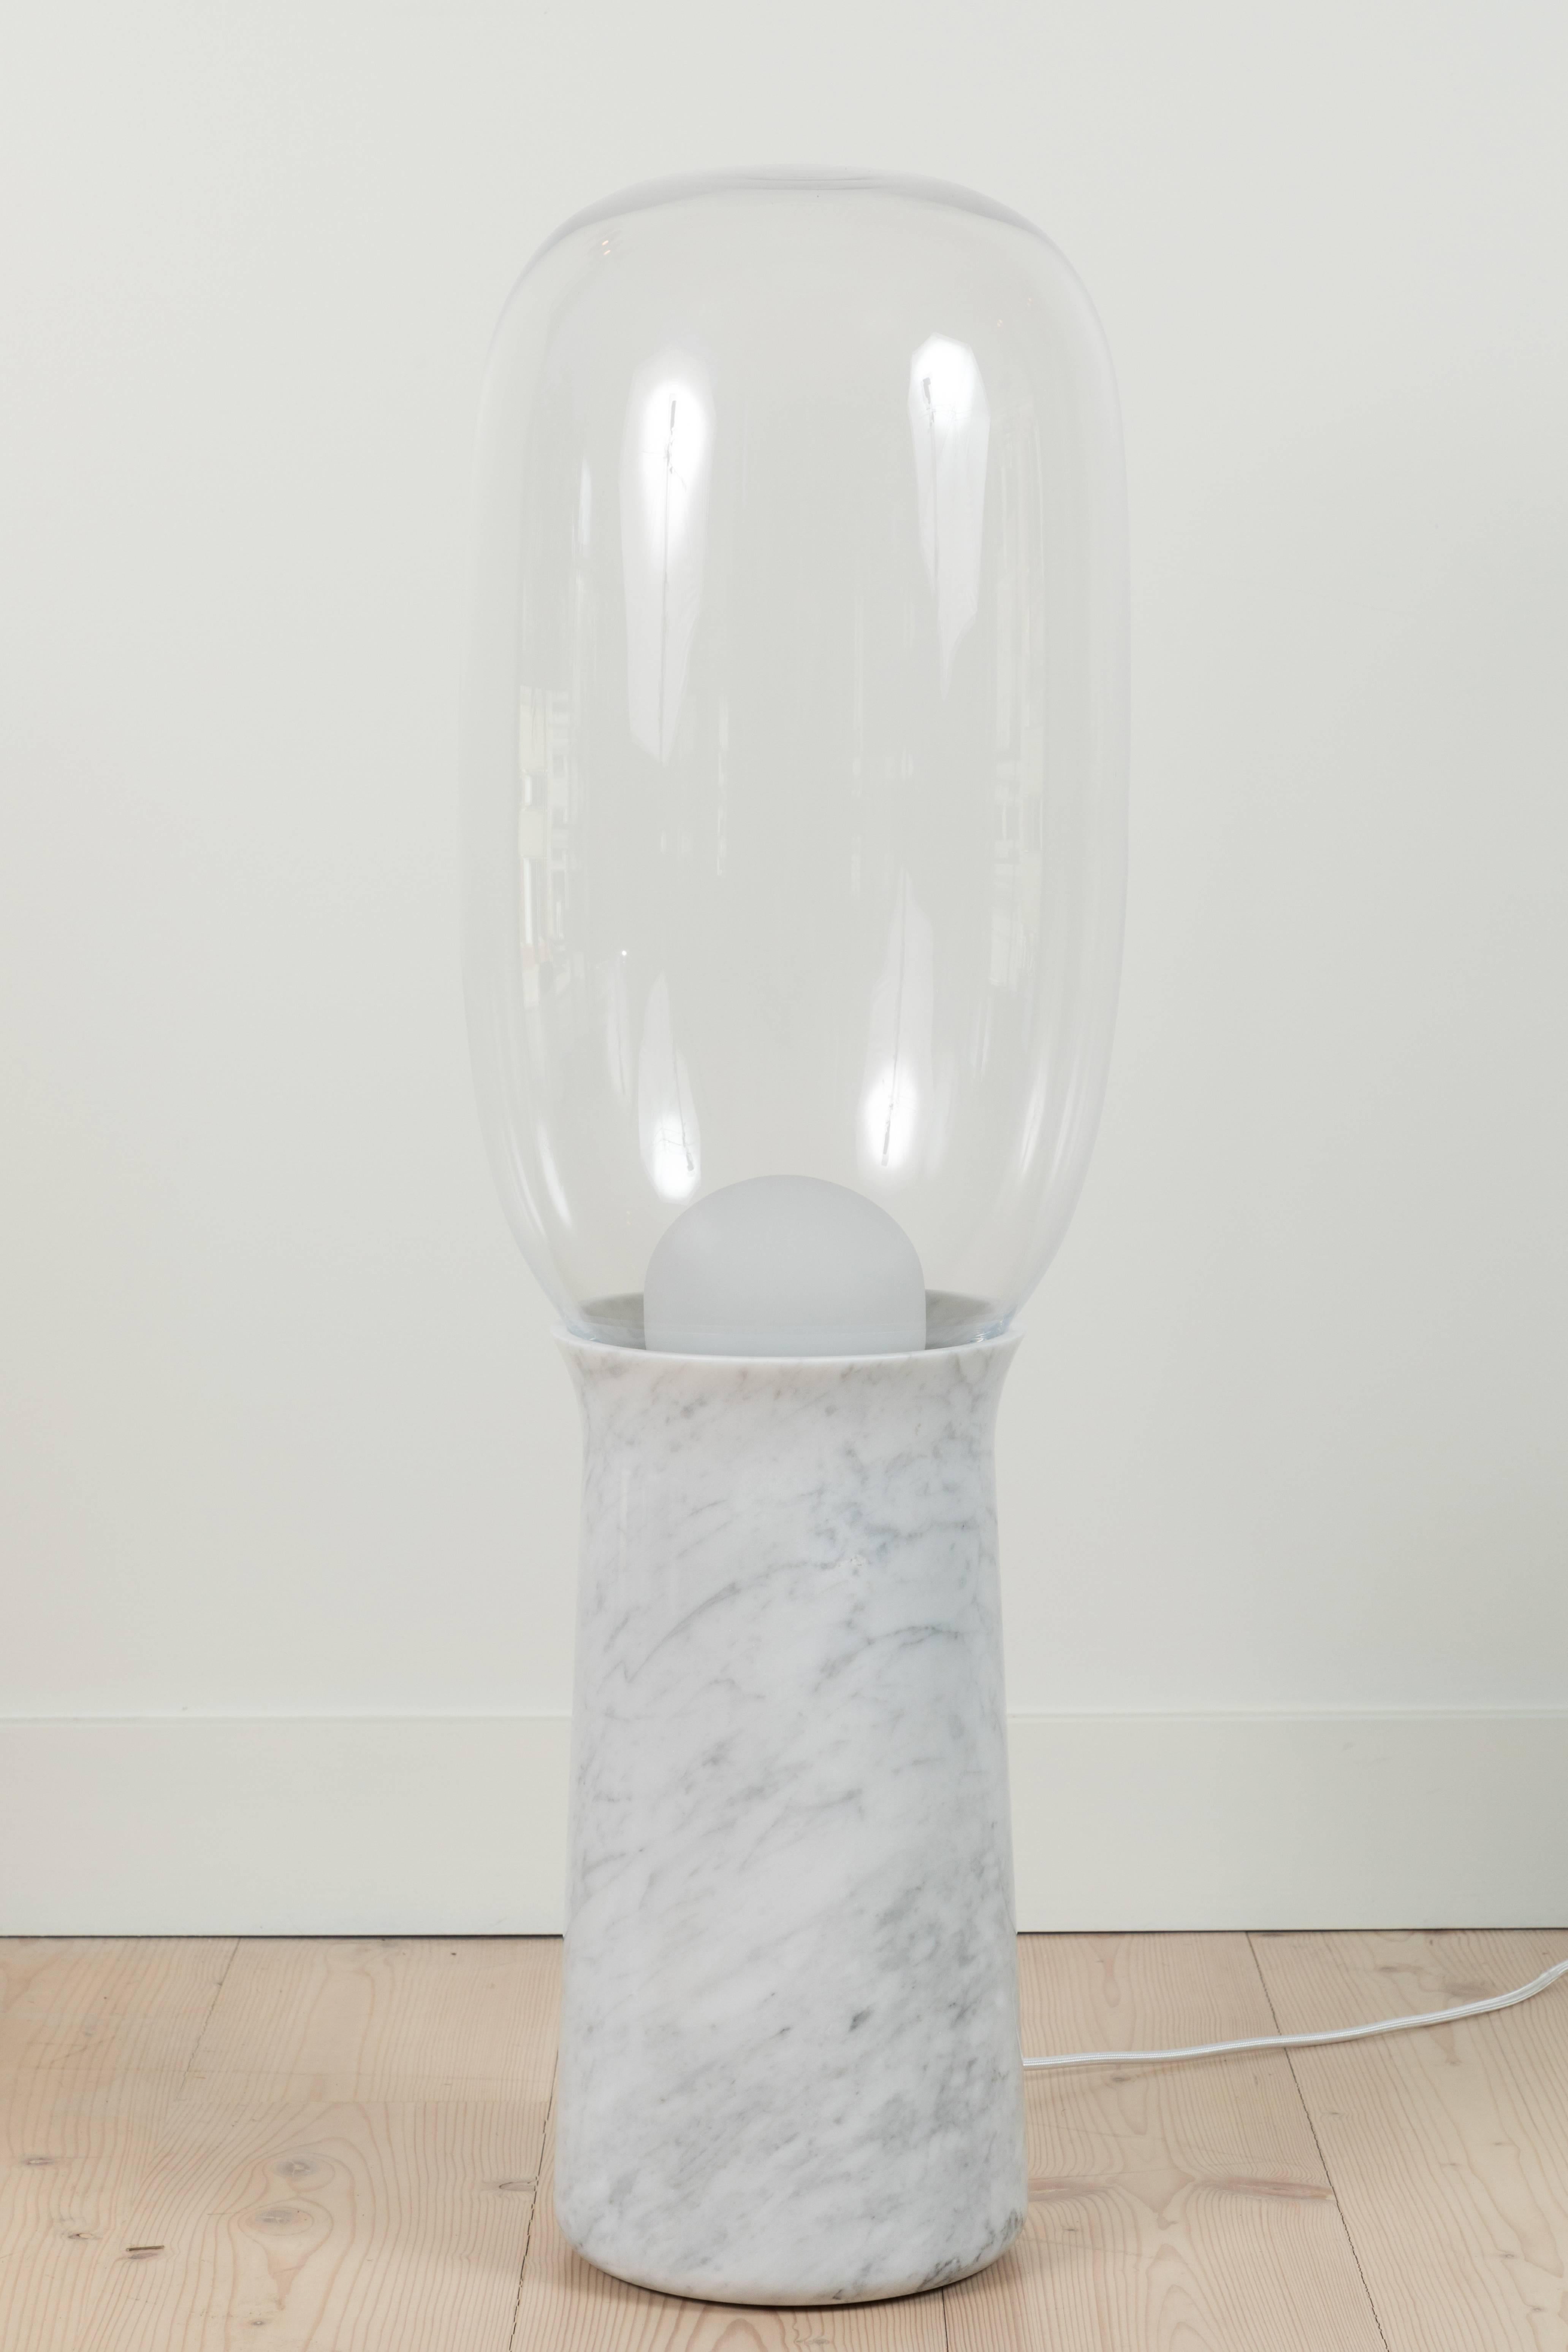 Torch lamp by Collection Particuliere for Lawson-Fenning